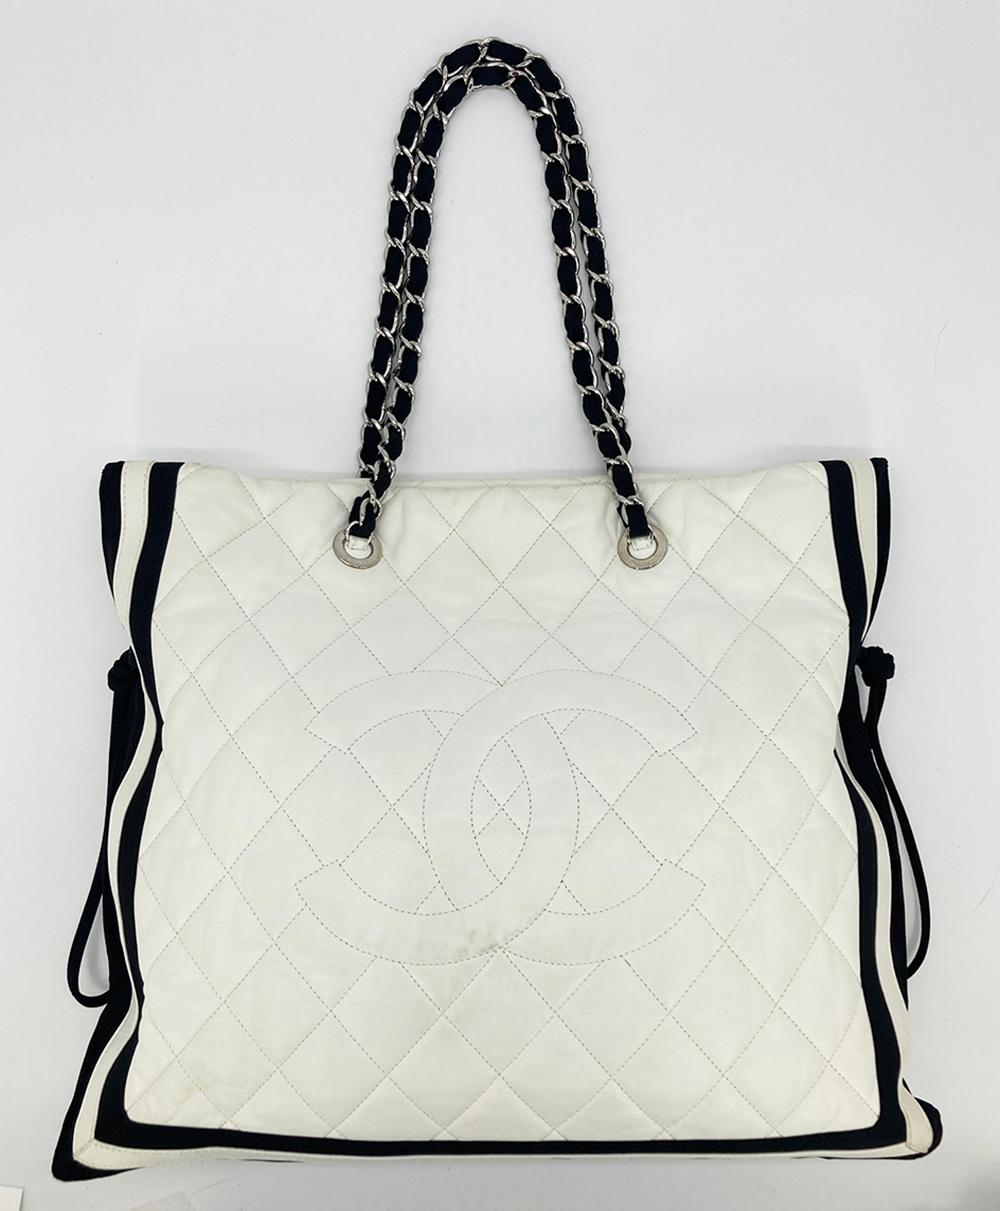 Chanel White Leather Black Grosgrain Quilted CC Shoulder Bag Tote in excellent condition. White quilted lambskin trimmed with black grosgrain trim and silver hardware. Woven ribbon and silver chain shoulder straps. Exetrior side drawstring feature